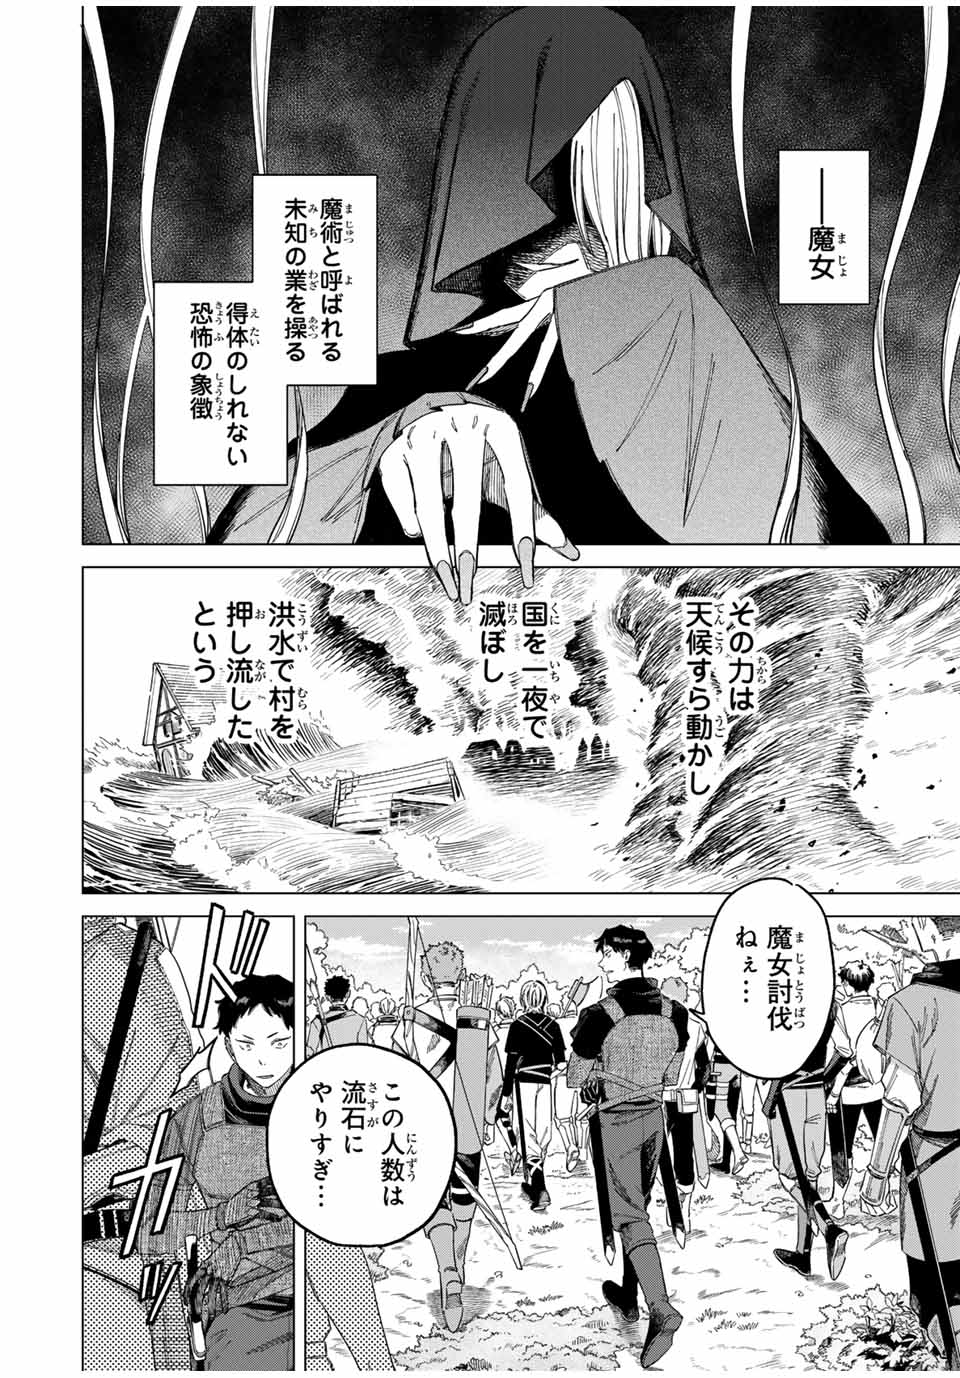 Witch and Mercenary 魔女と傭兵 第1.1話 - Page 4